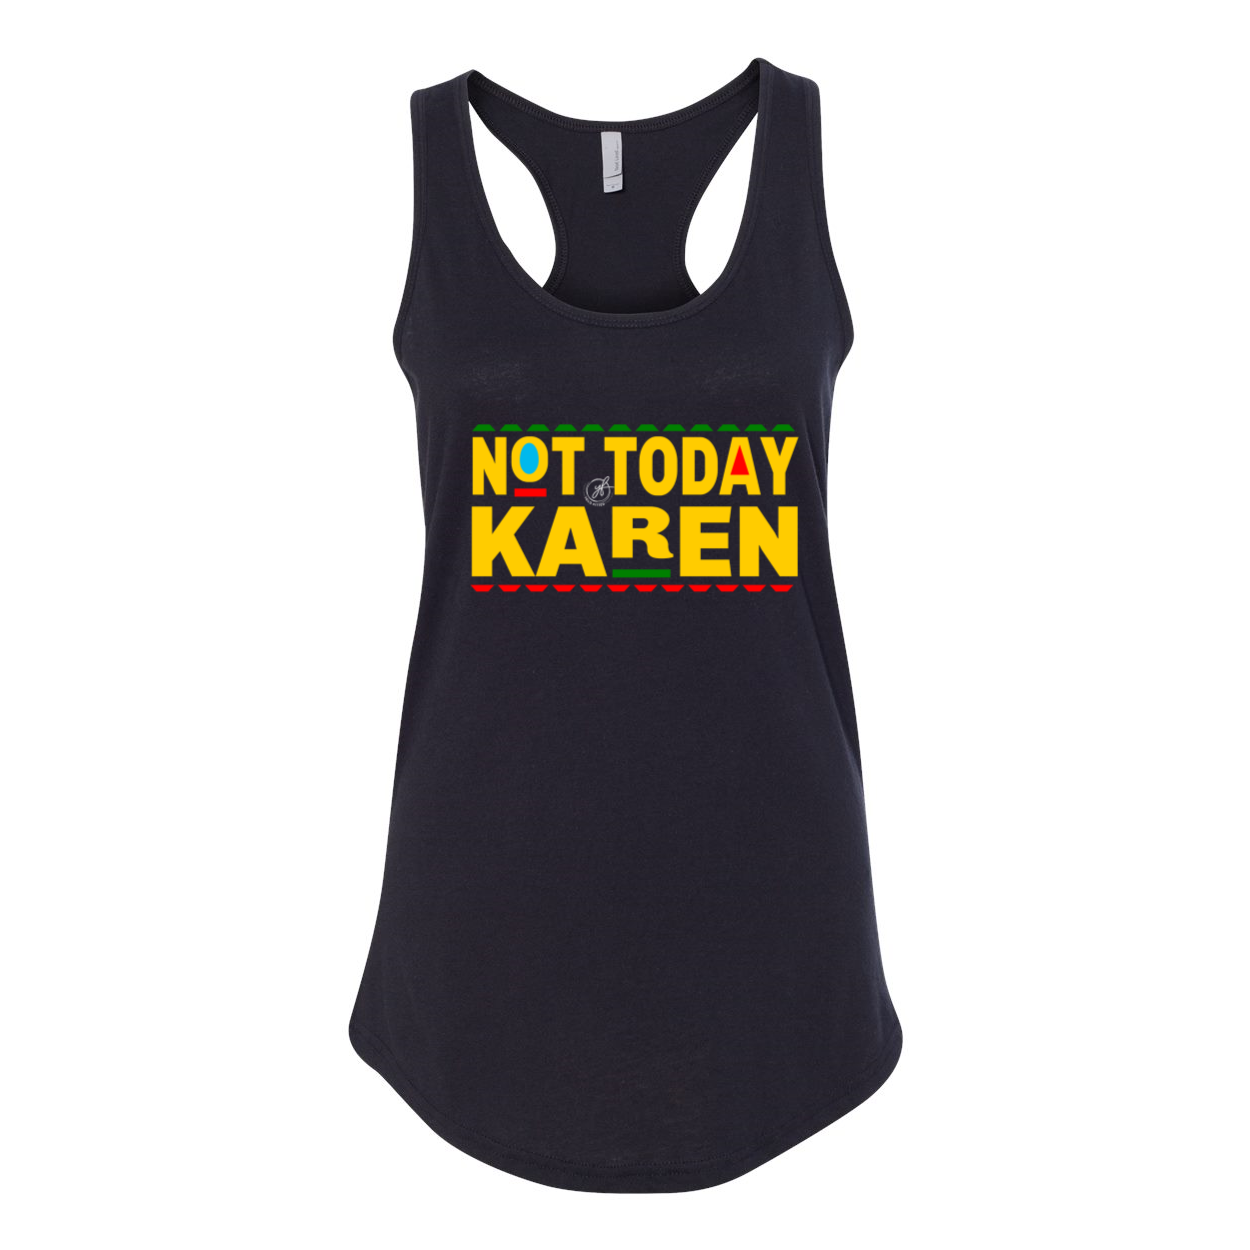 "NOT TODAY KAREN"  WOMEN'S YOLO FITTED TANK - Yolofitted